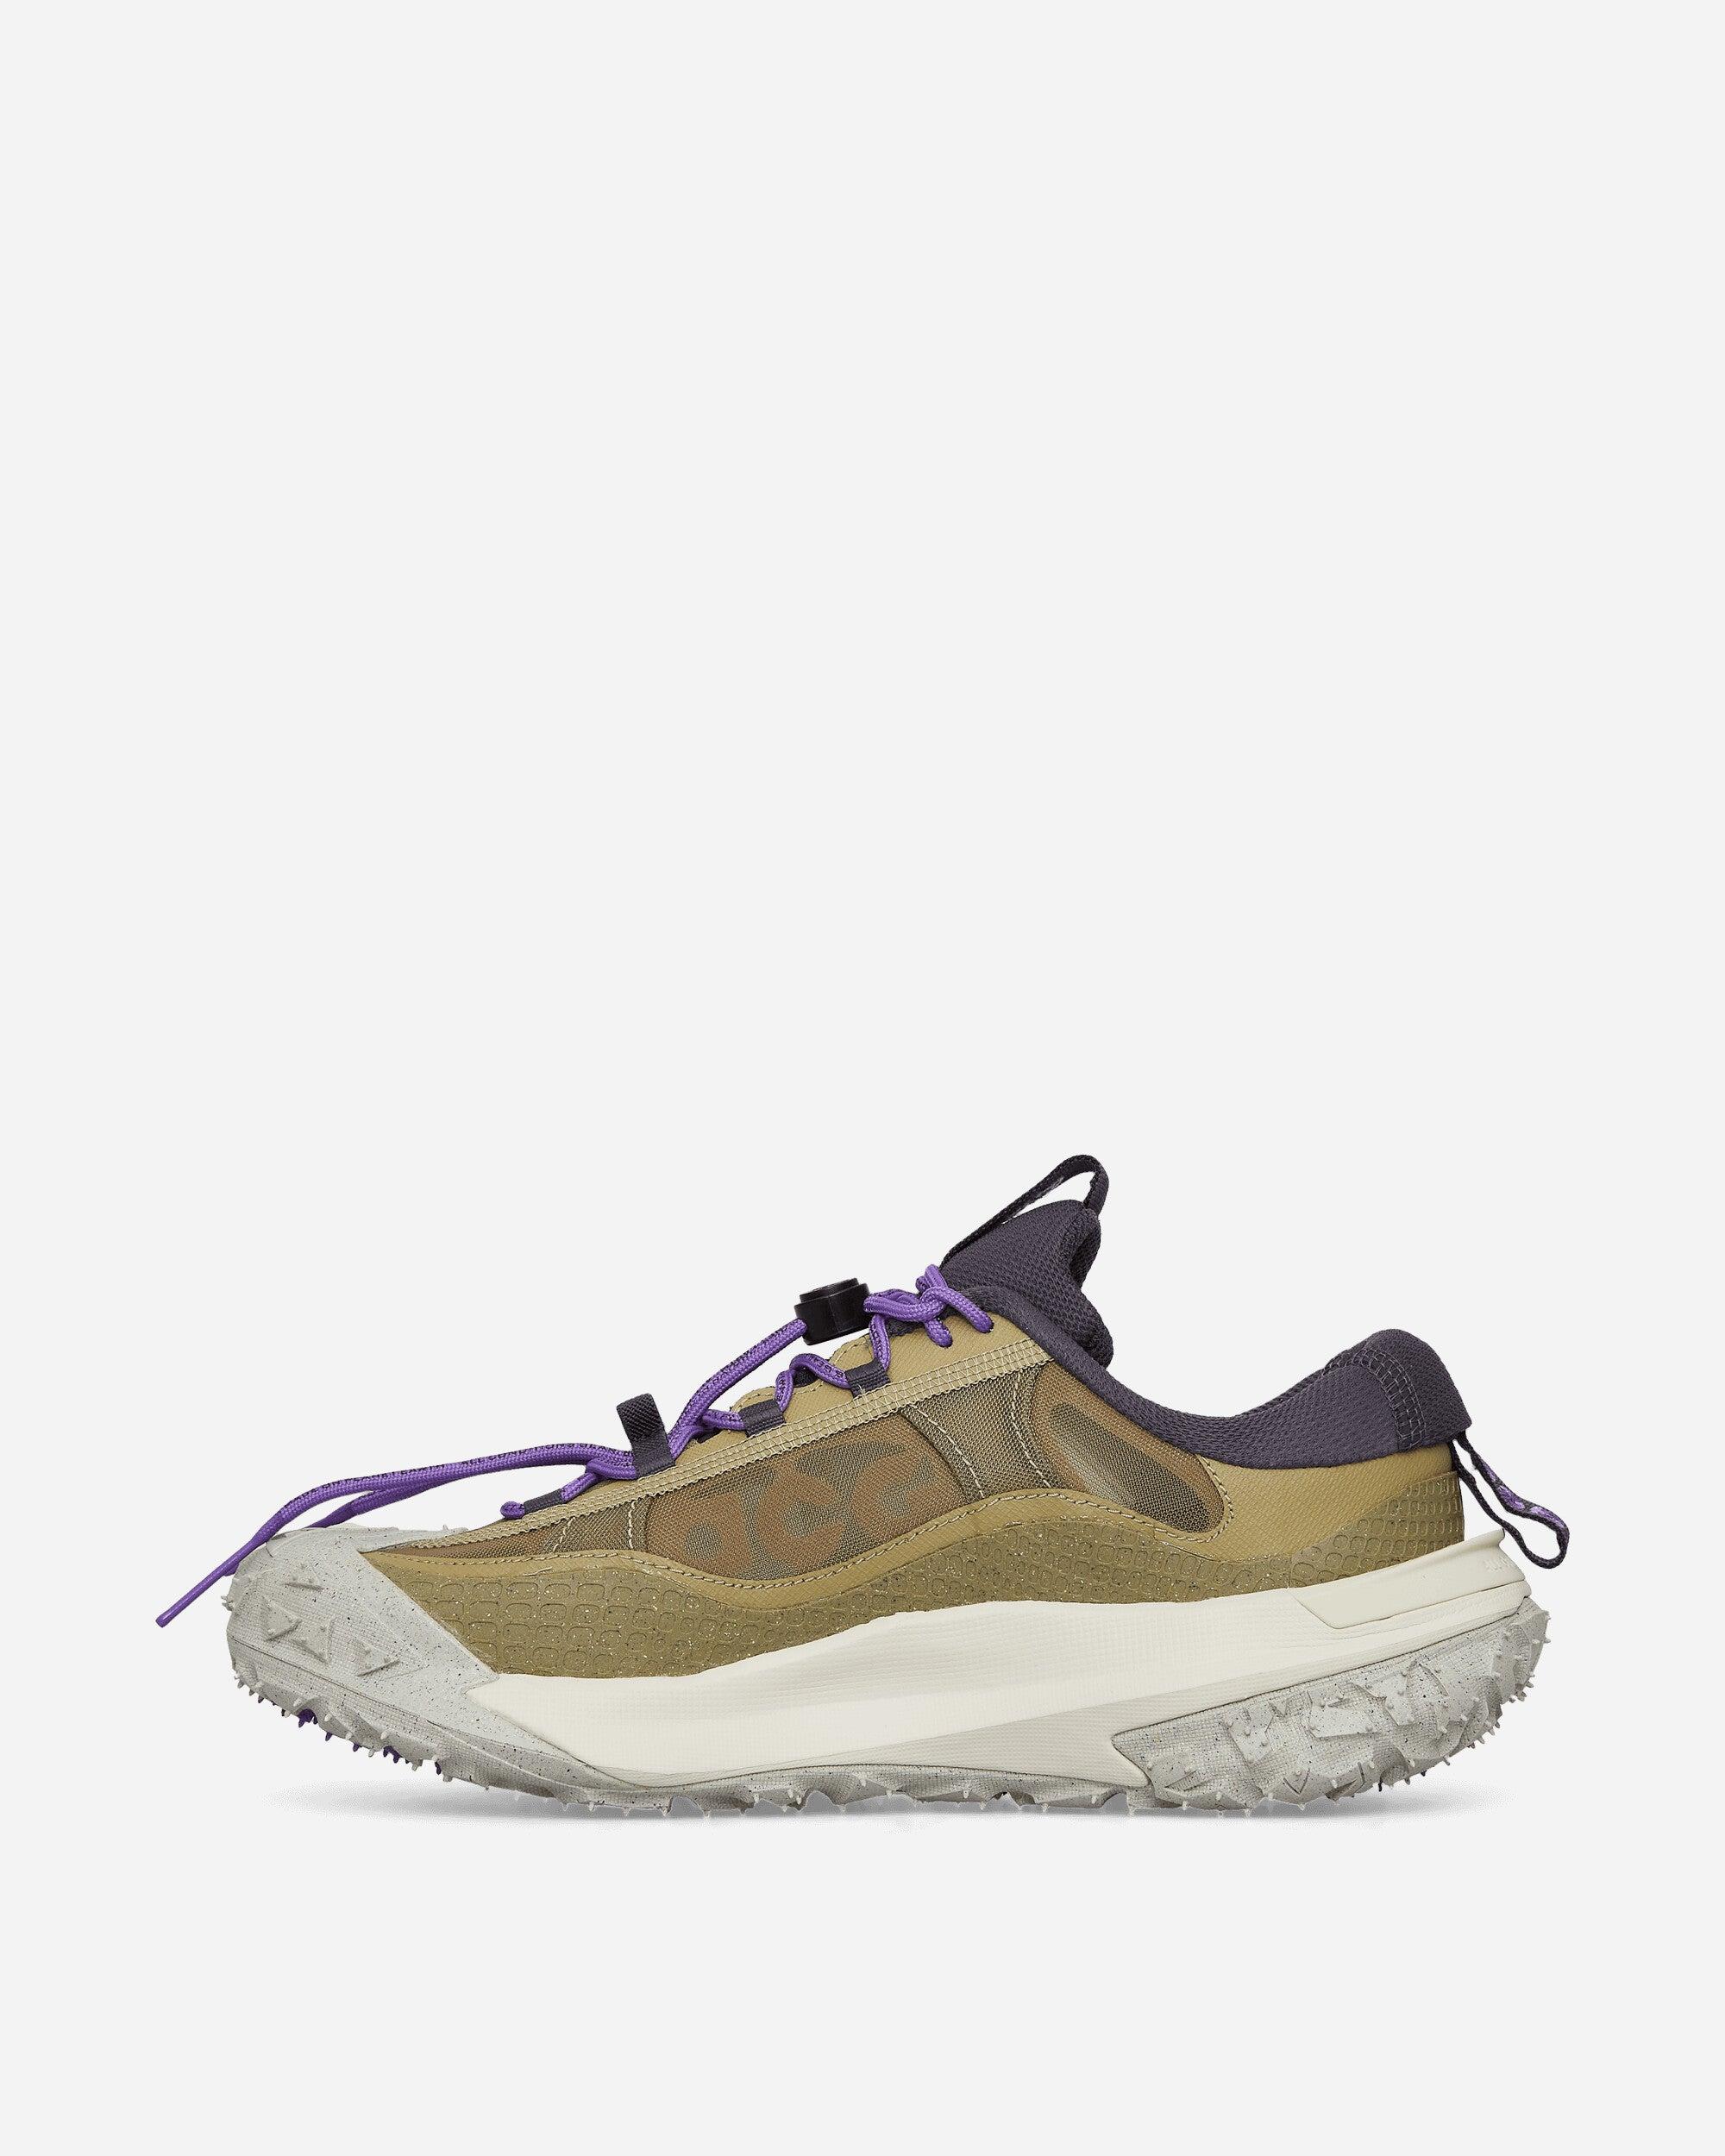 Nike Acg Mountain Fly 2 Low Sneakers Olive for Men | Lyst